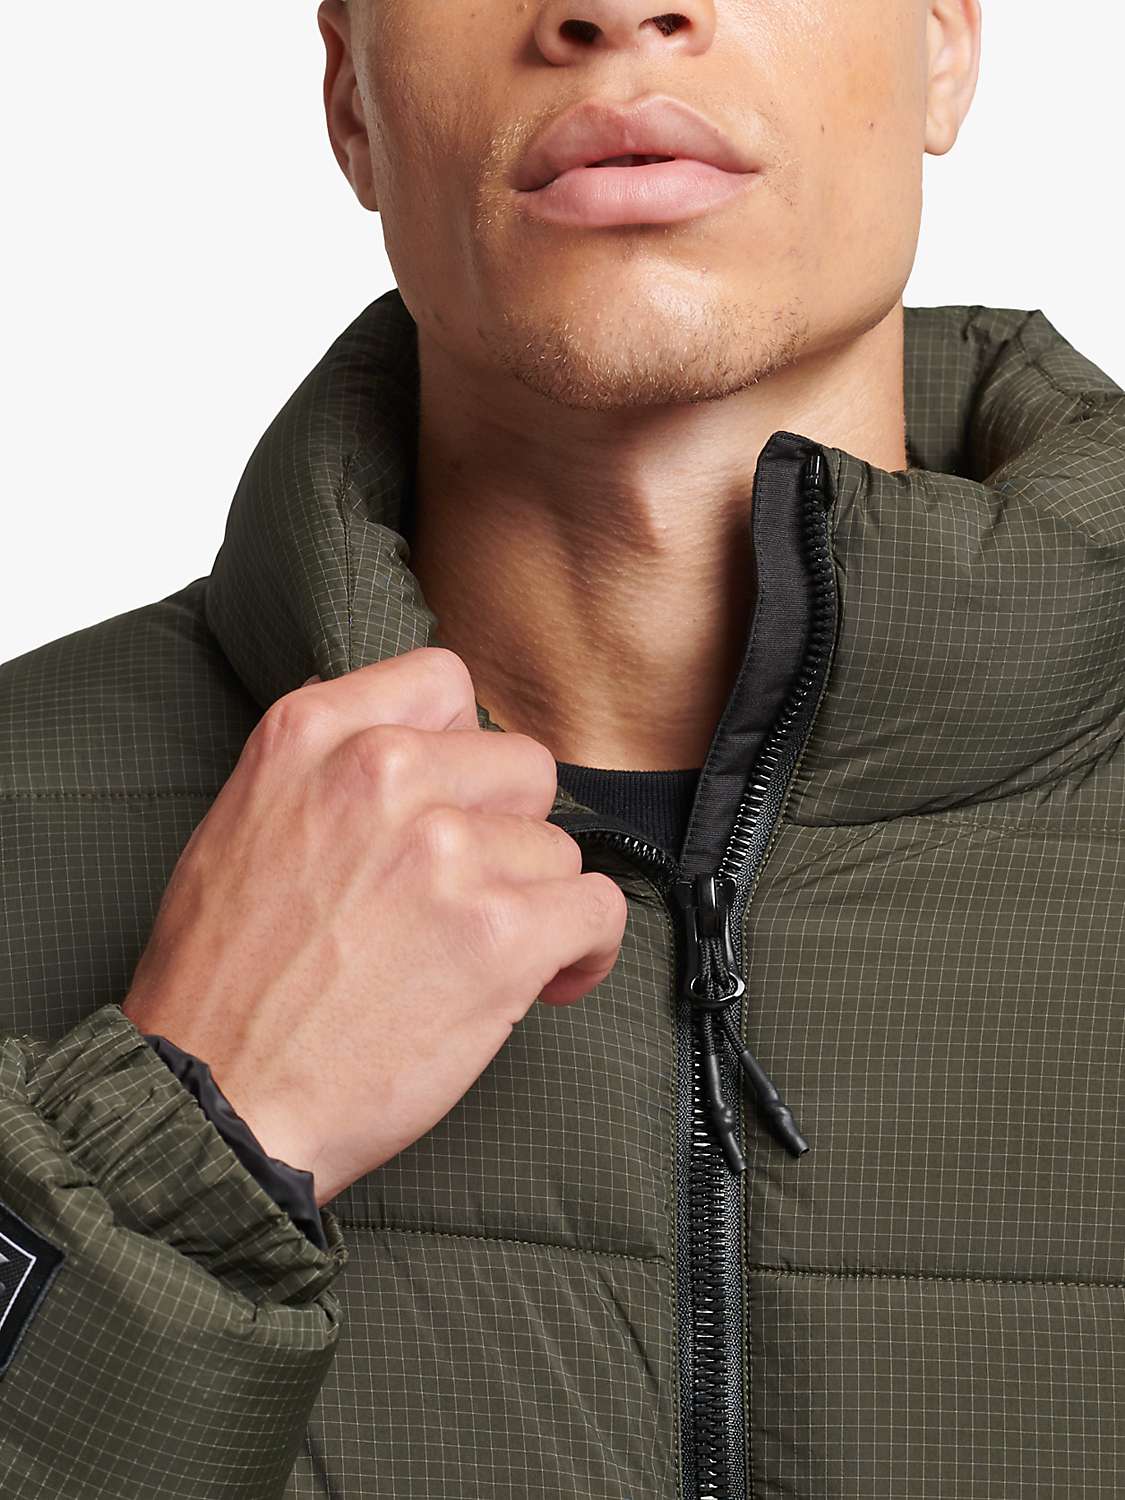 Buy Superdry Non Hooded Sports Puffer Jacket Online at johnlewis.com